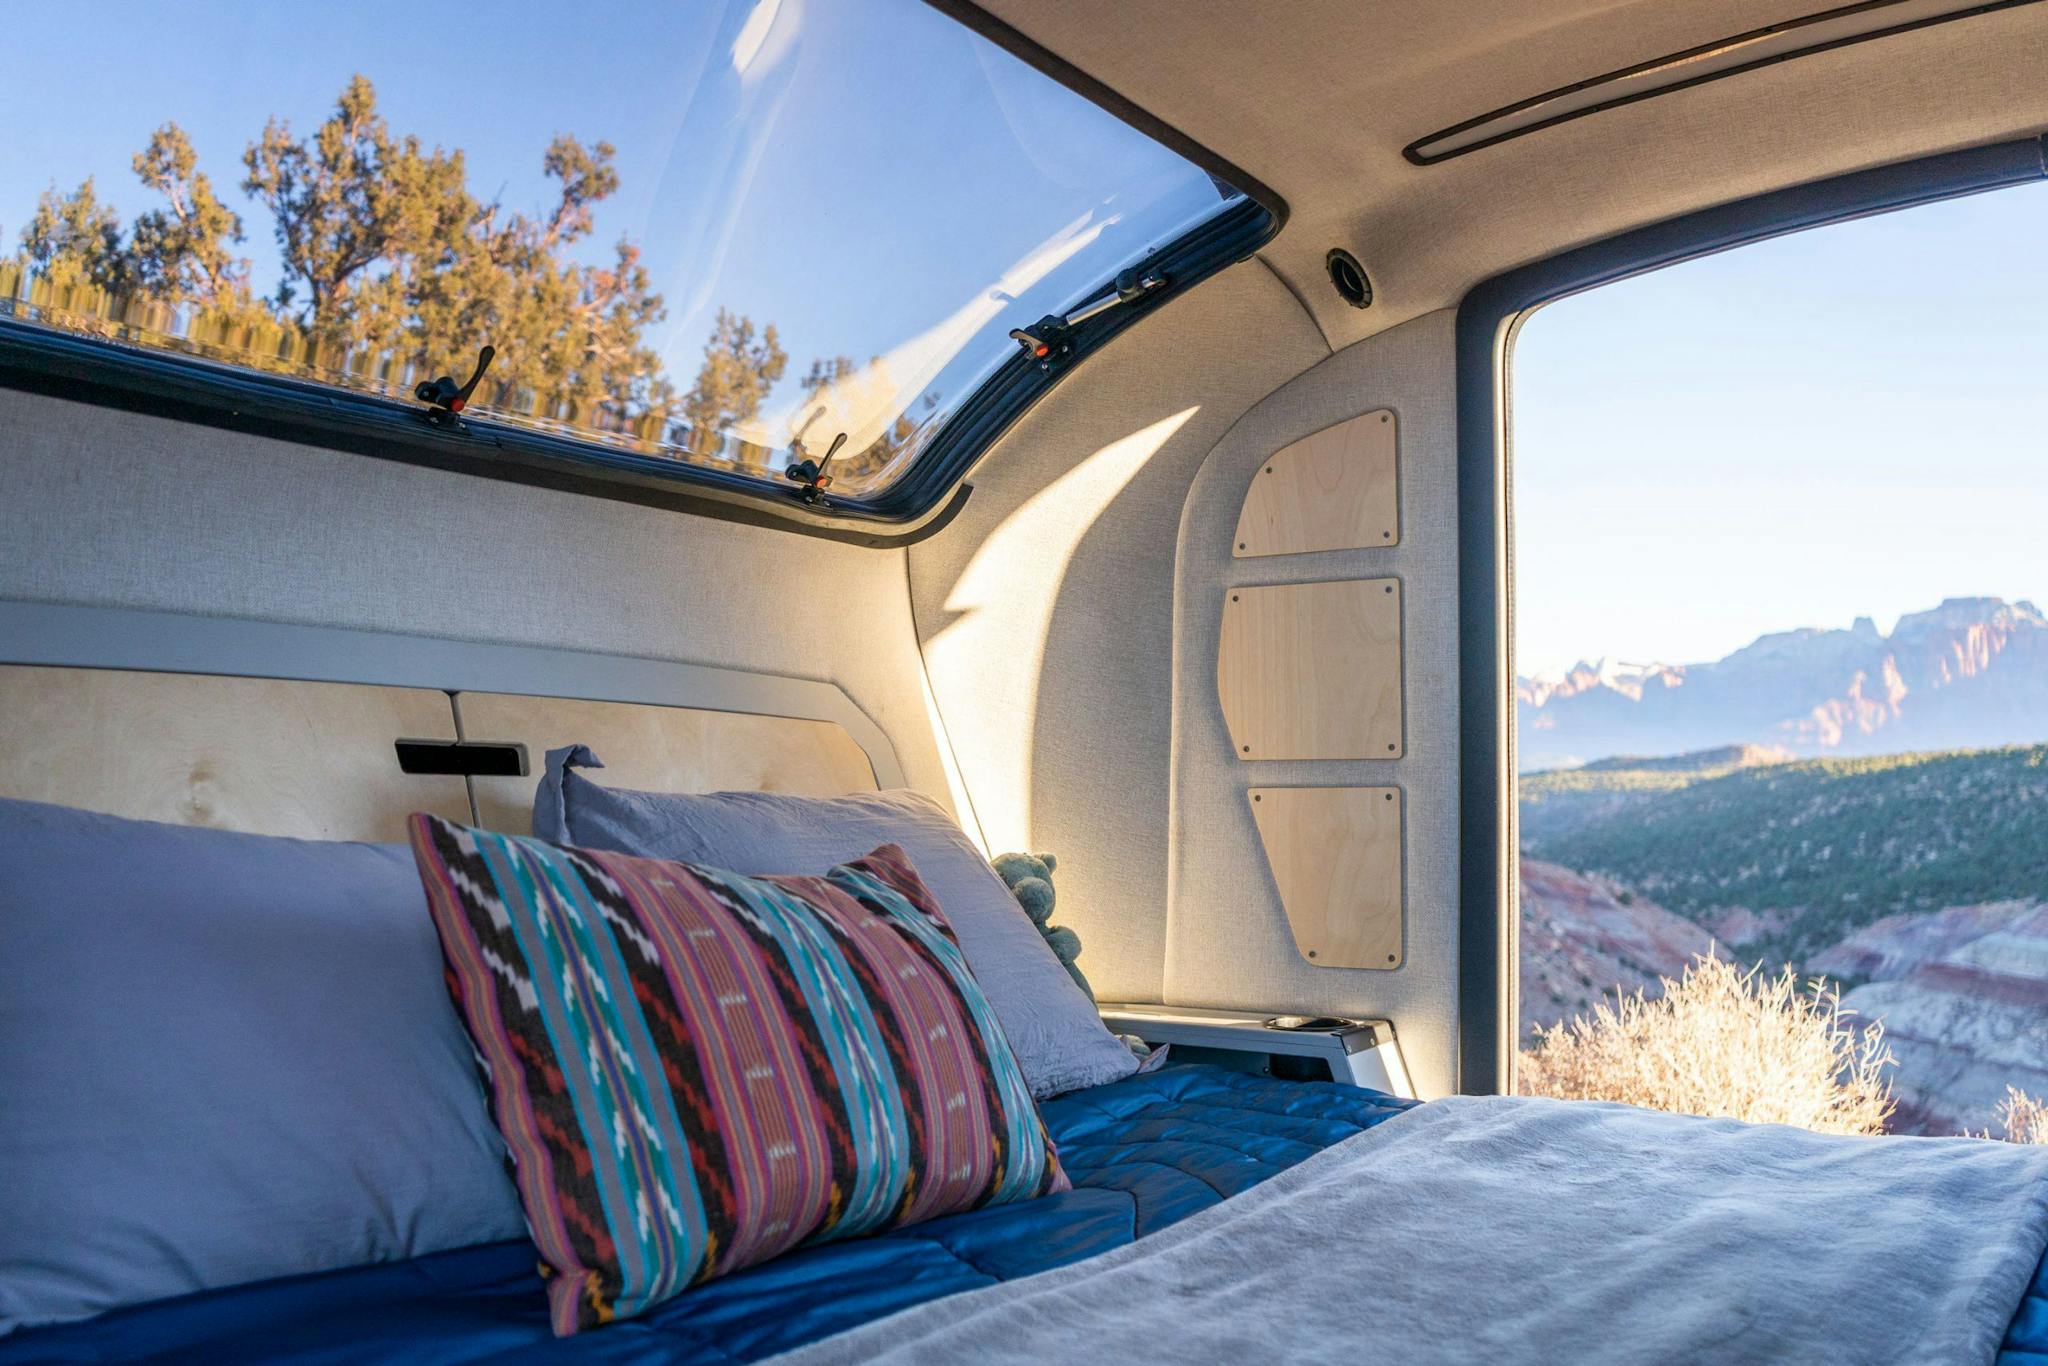 The interior of an adventure trailer, showing a beautiful stargazer window and queen sized bed.